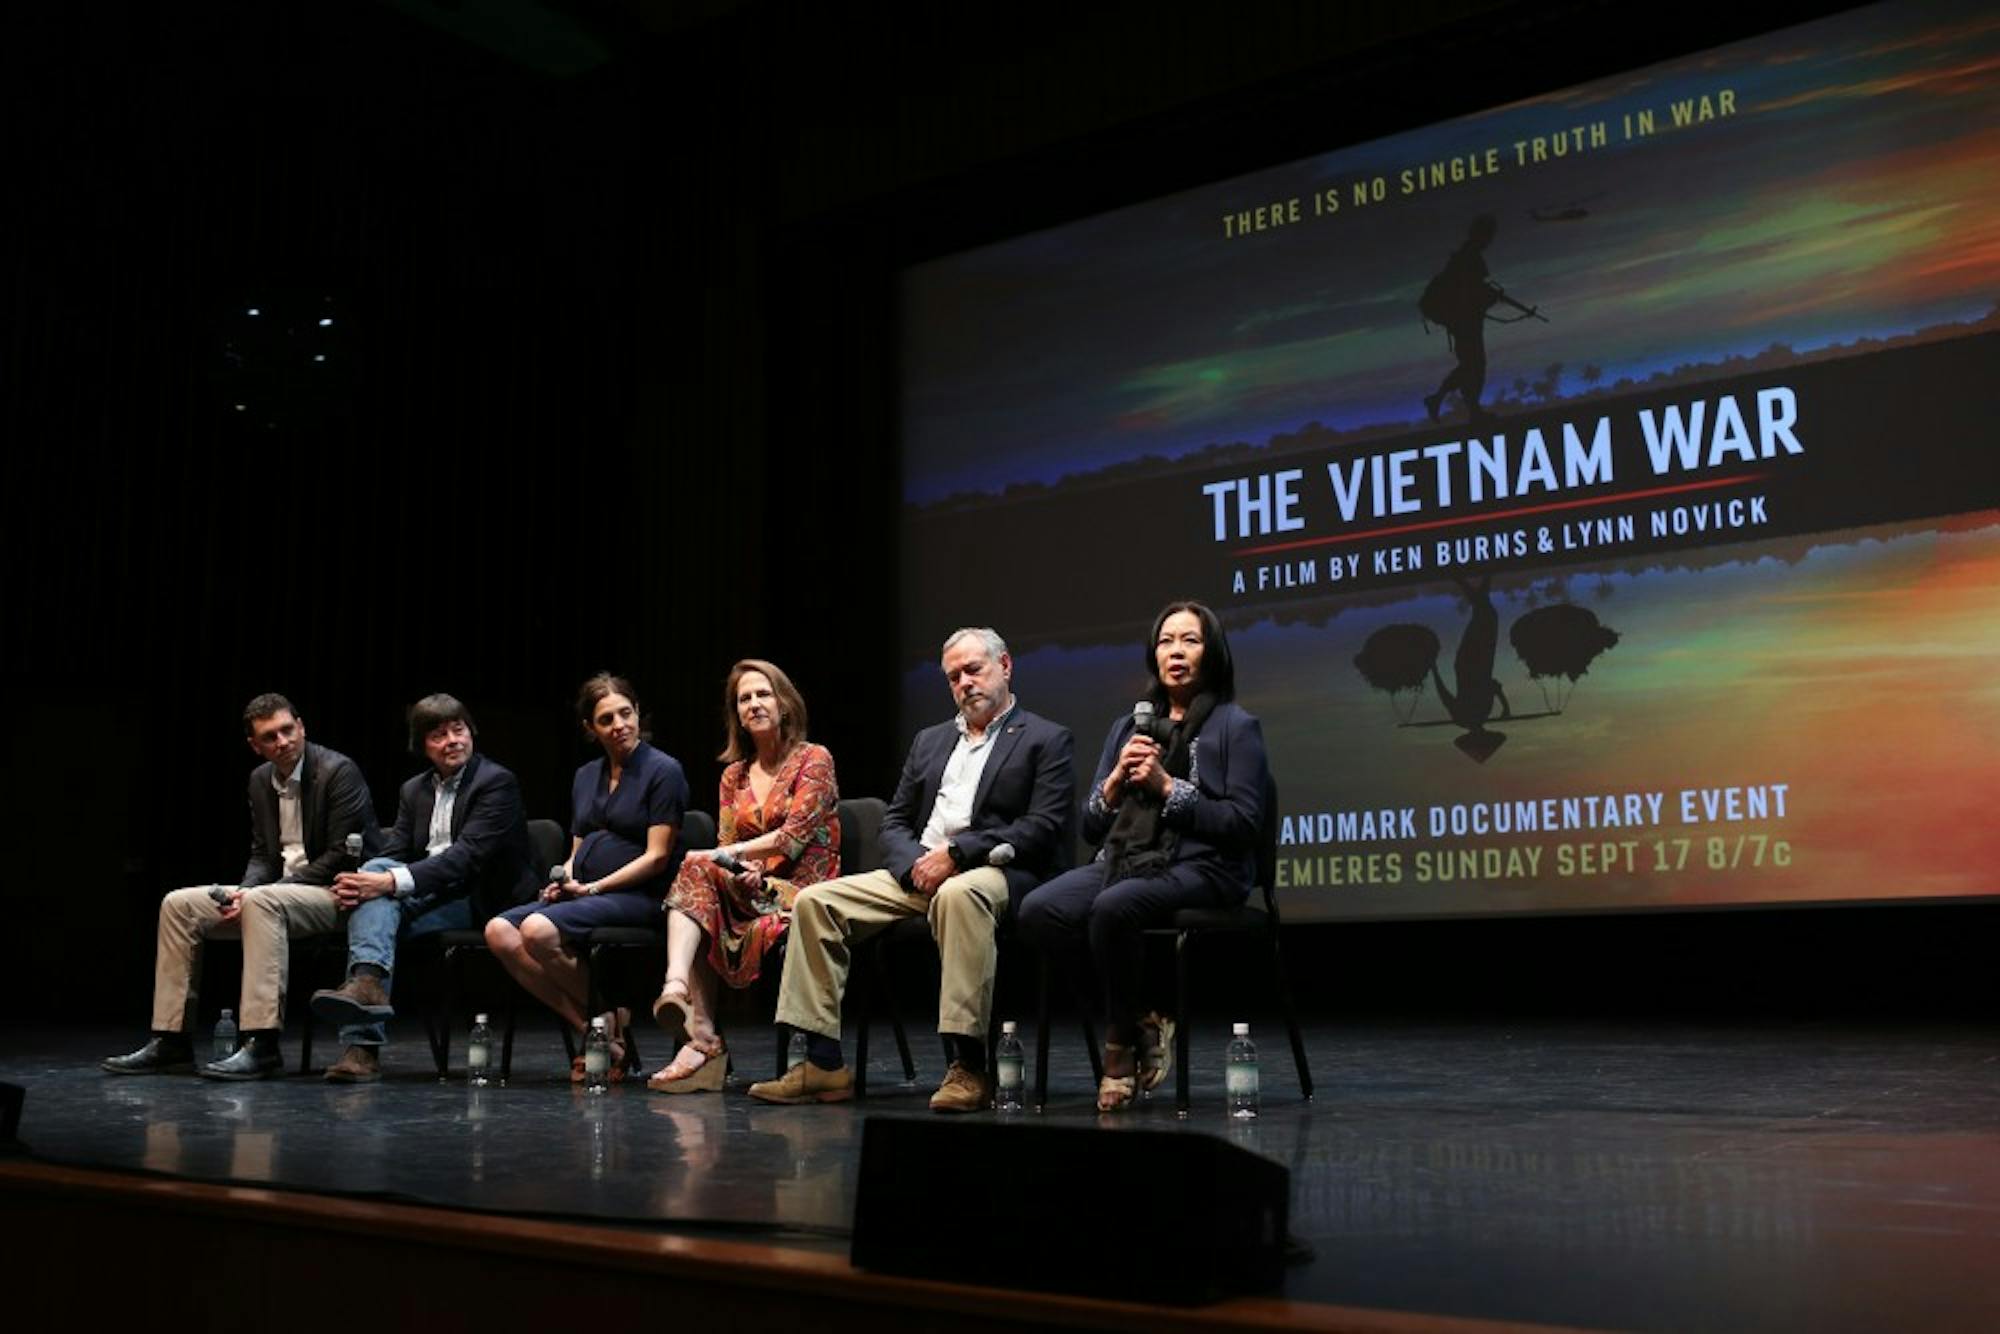 Ken Burns presents selections from The Vietnam War in Hanover, NH on Thursday, July 13, 2017.

Copyright 2017 Rob Strong